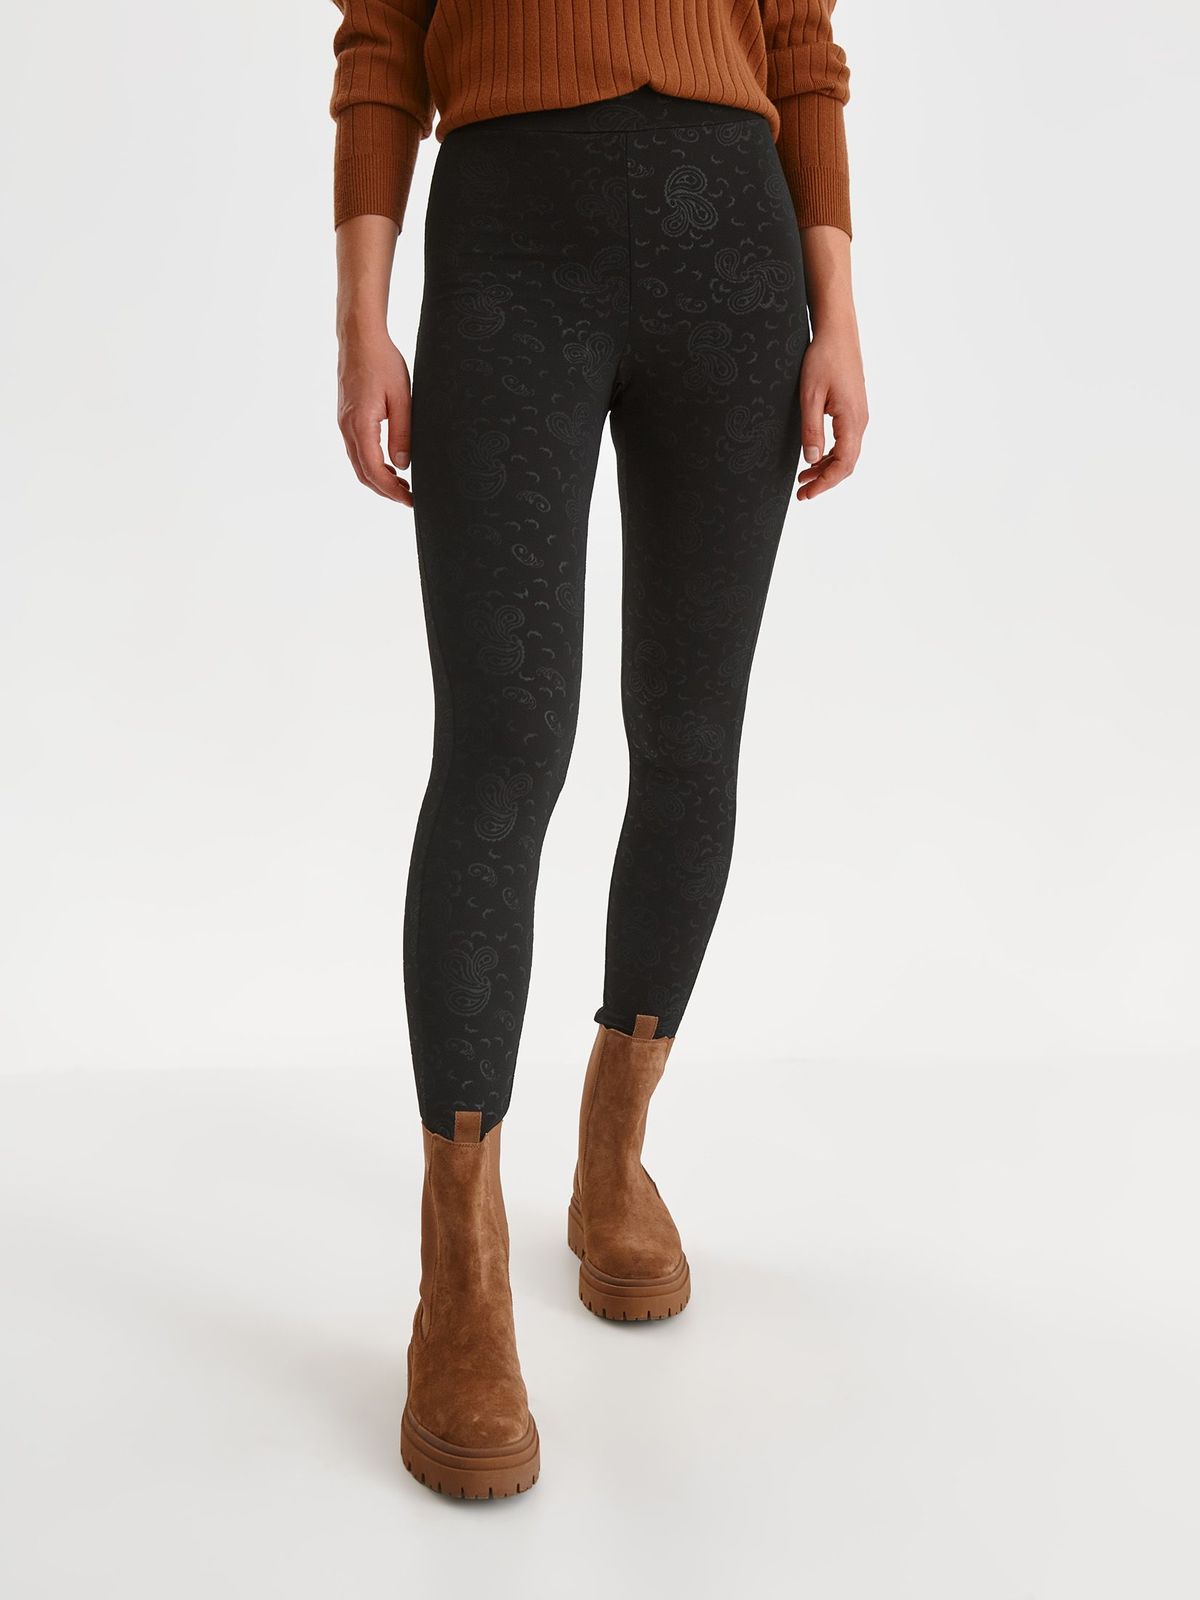 Black tights high waisted textured crepe